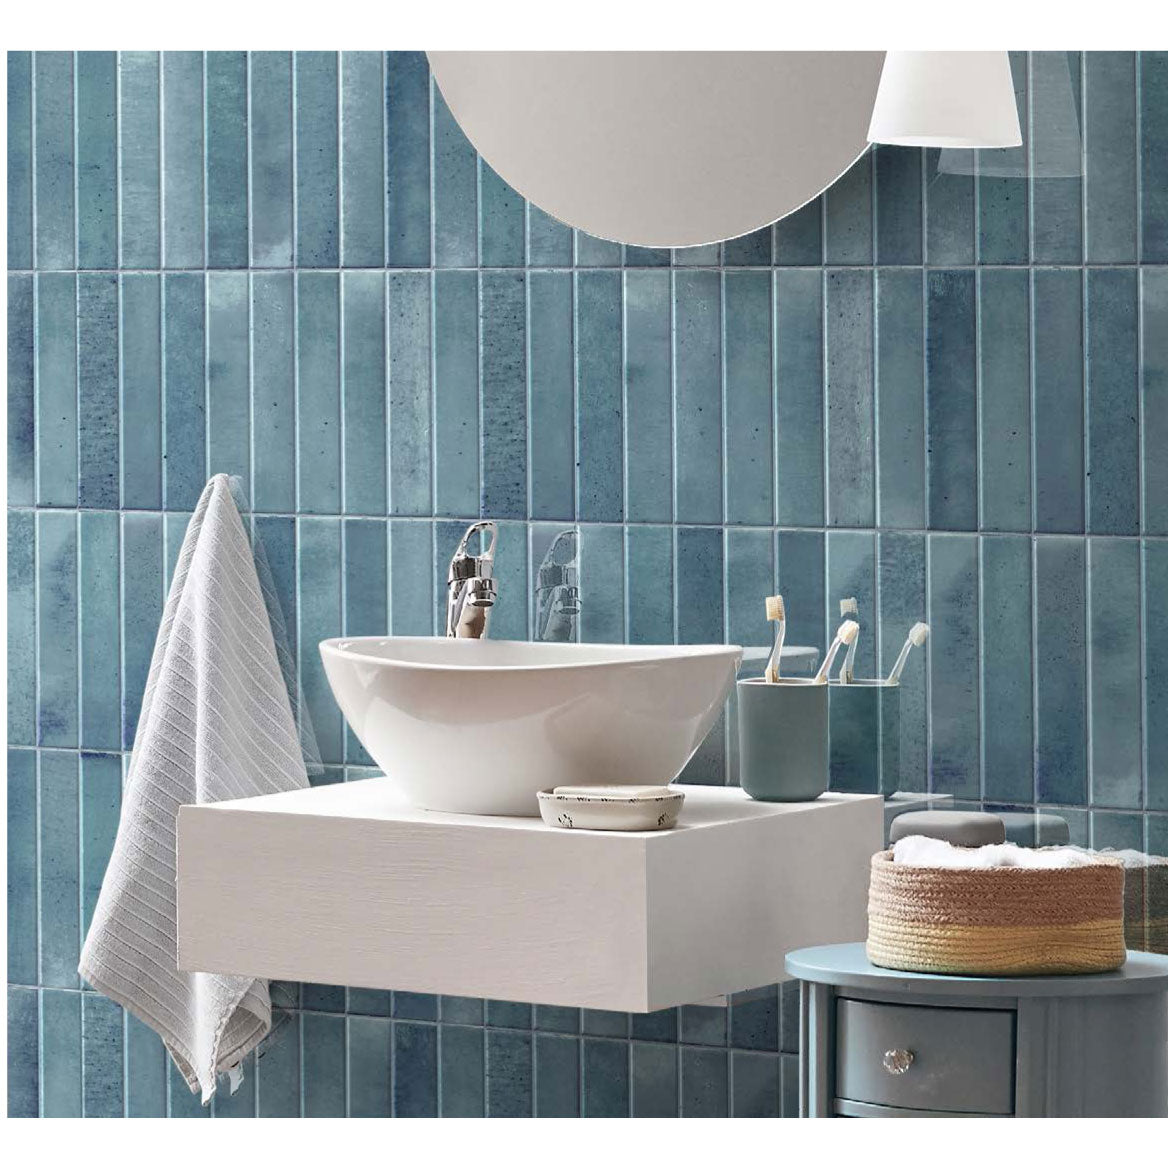 Cobsa - Homey Series 5 in. x 10 in. Porcelain Subway Tile - Sky